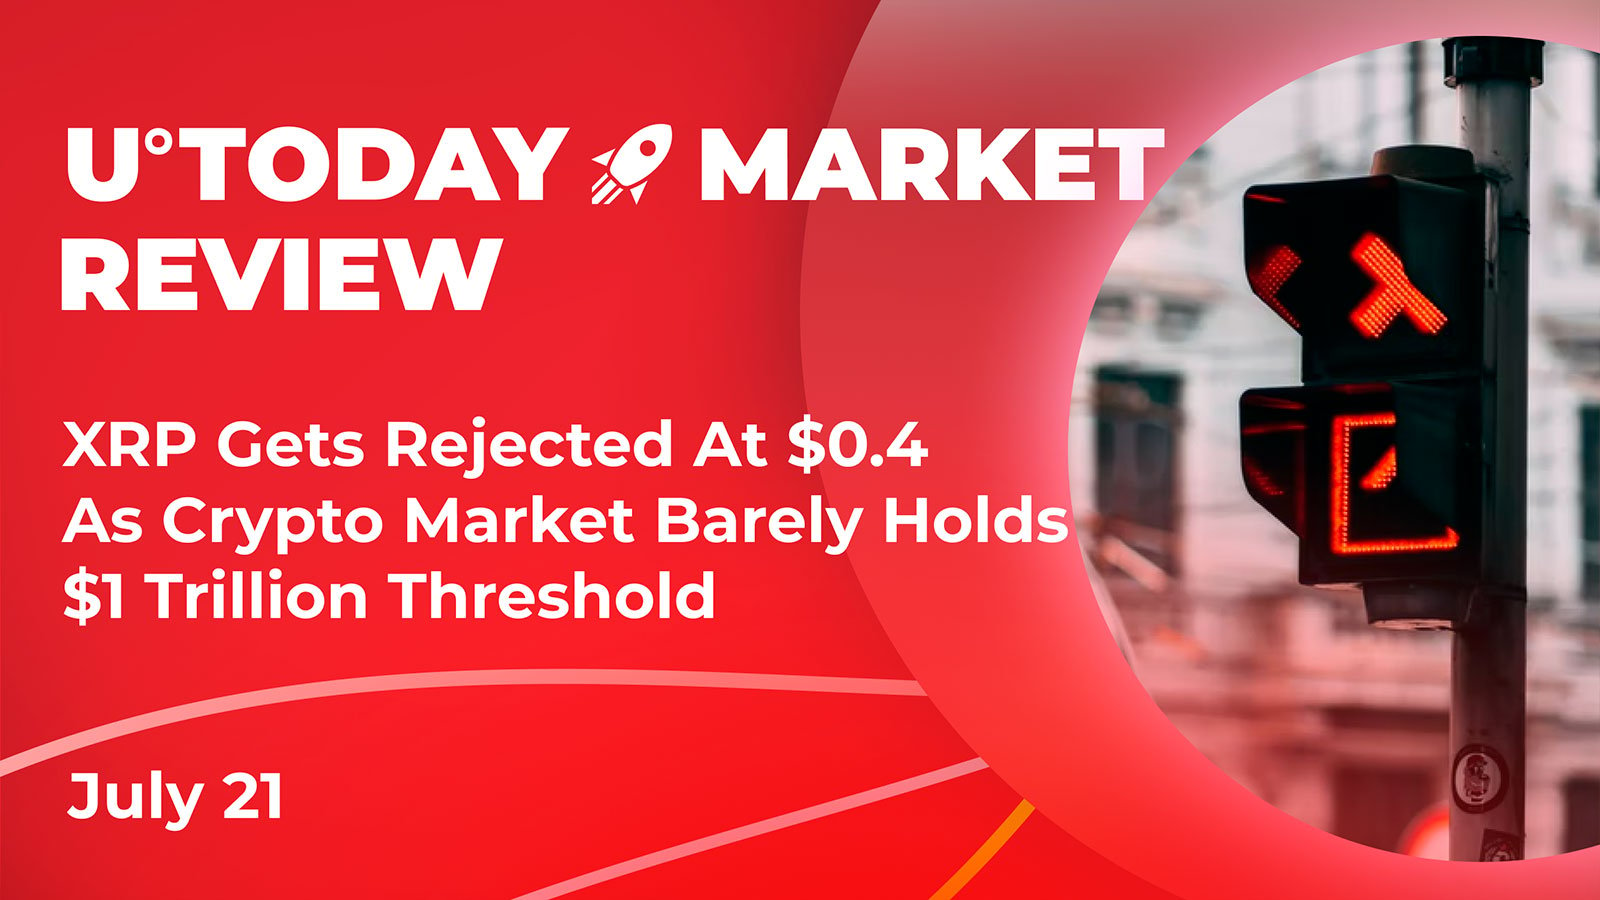 XRP Gets Rejected At $0.4 As Crypto Market Barely Holds $1 Trillion Threshold: Crypto Market Review, July 21